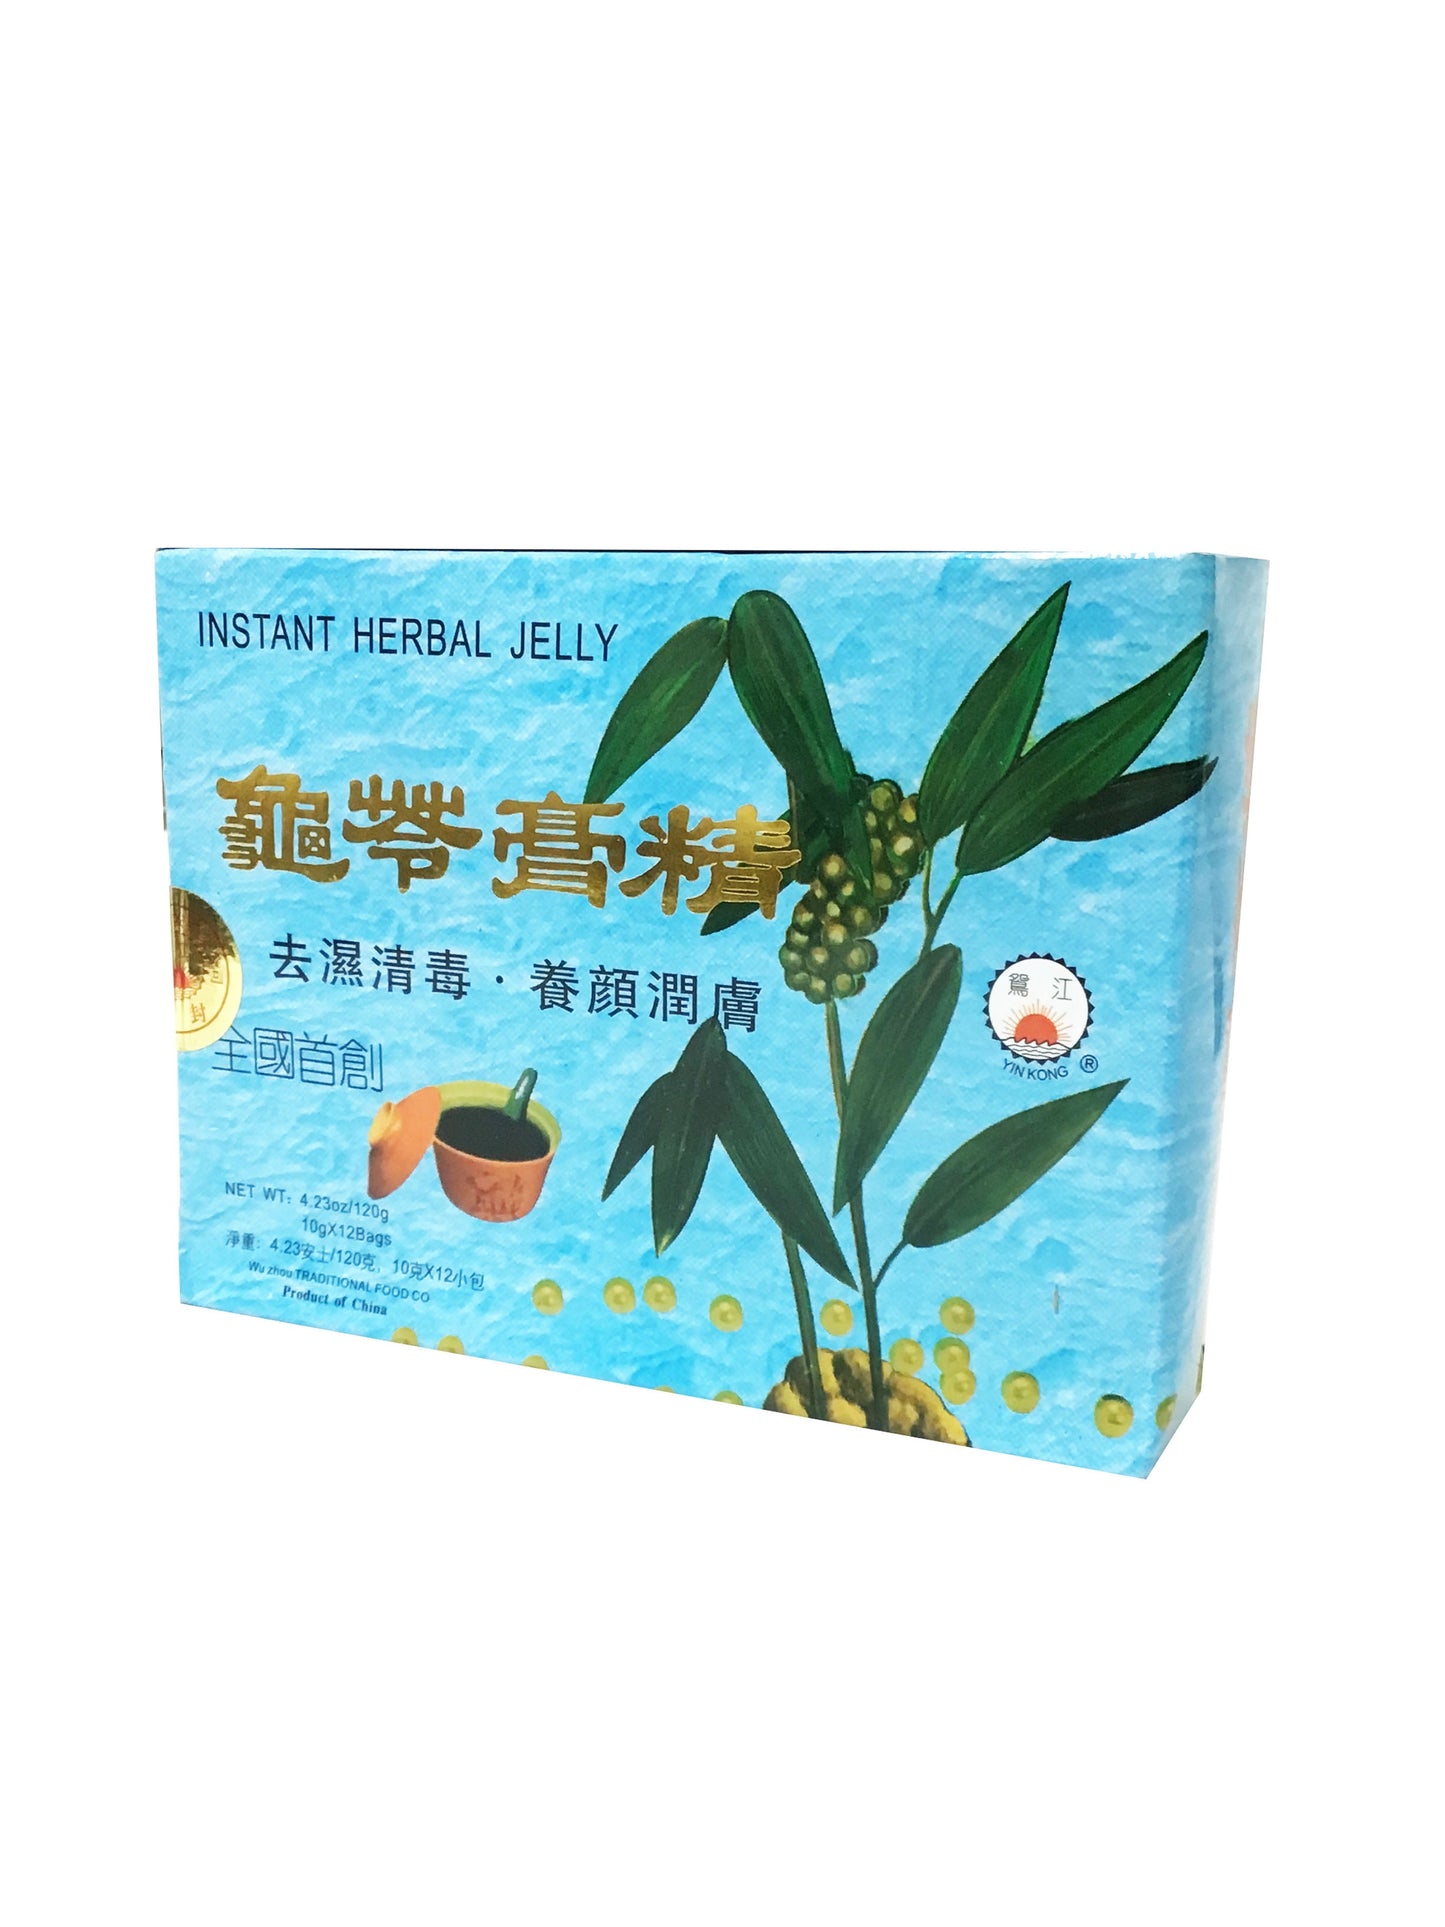 YIN KONG Gui Ling Gao Instant Herbal Jelly - 鴦江牌 龟苓膏精 (12 bags) 120g